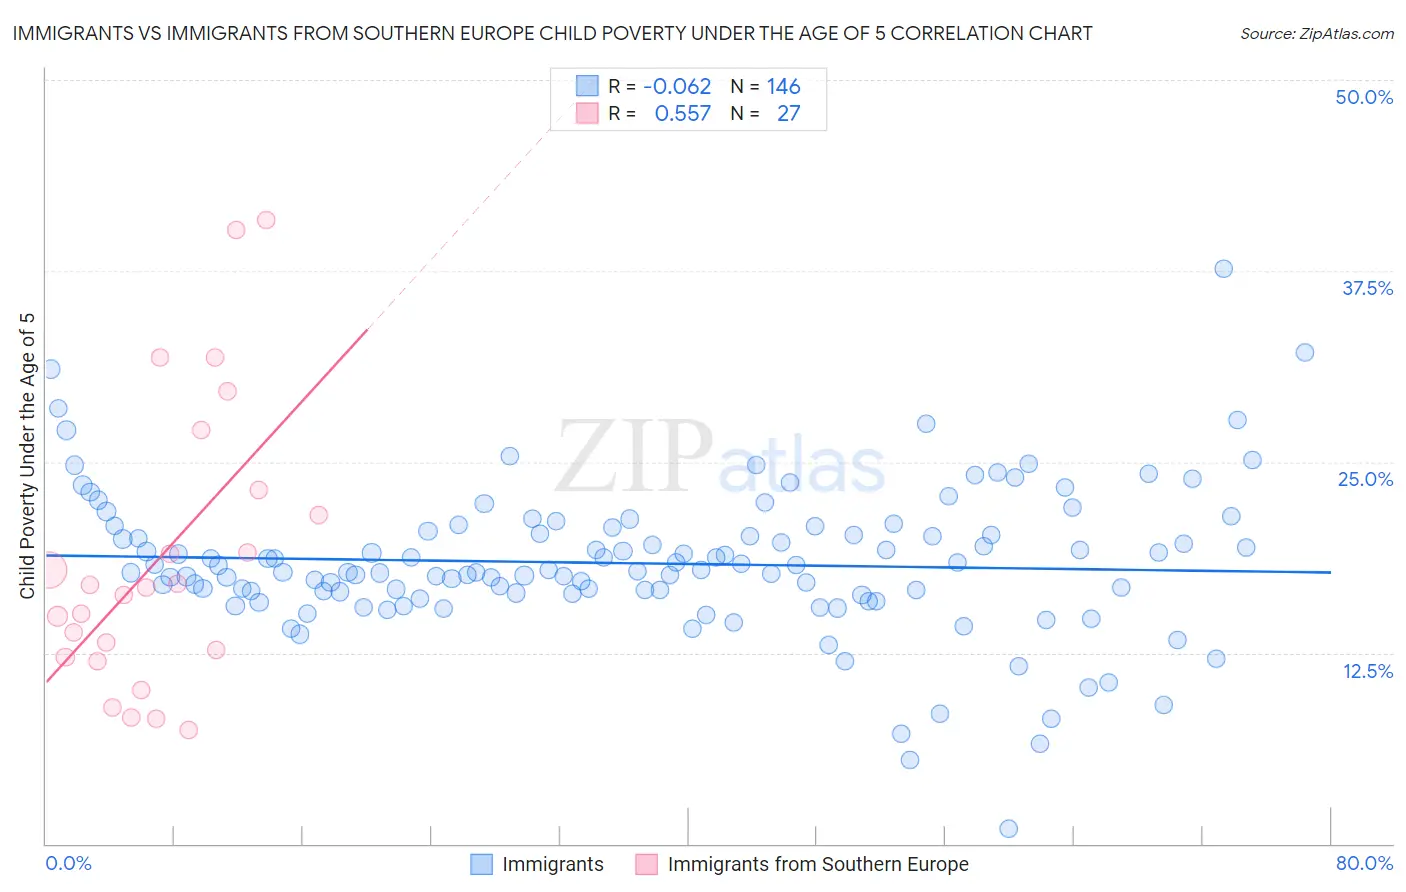 Immigrants vs Immigrants from Southern Europe Child Poverty Under the Age of 5